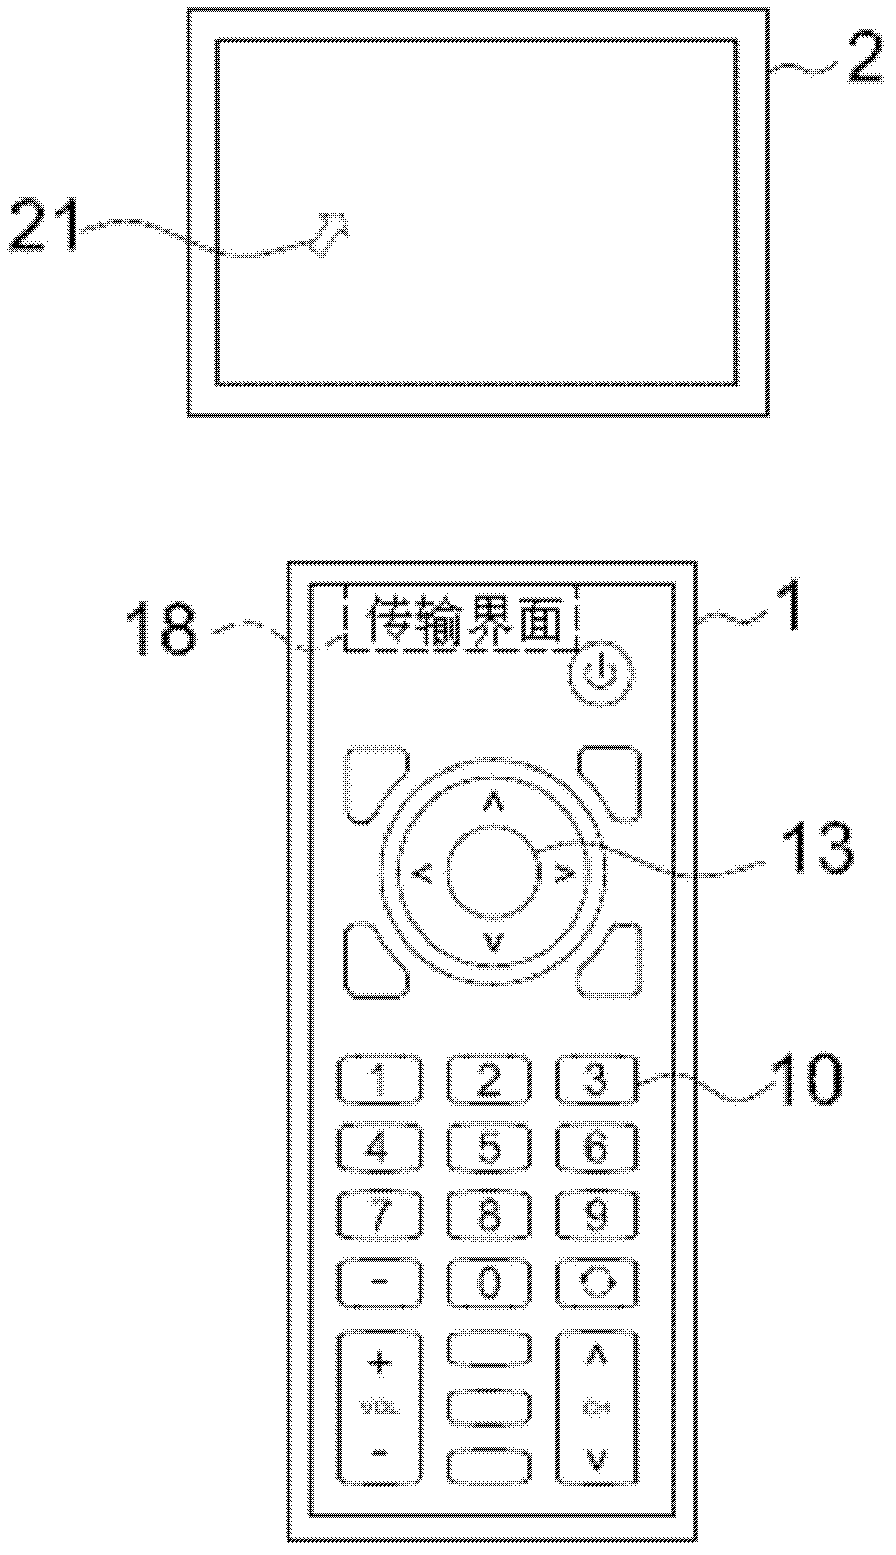 Remote control and display system